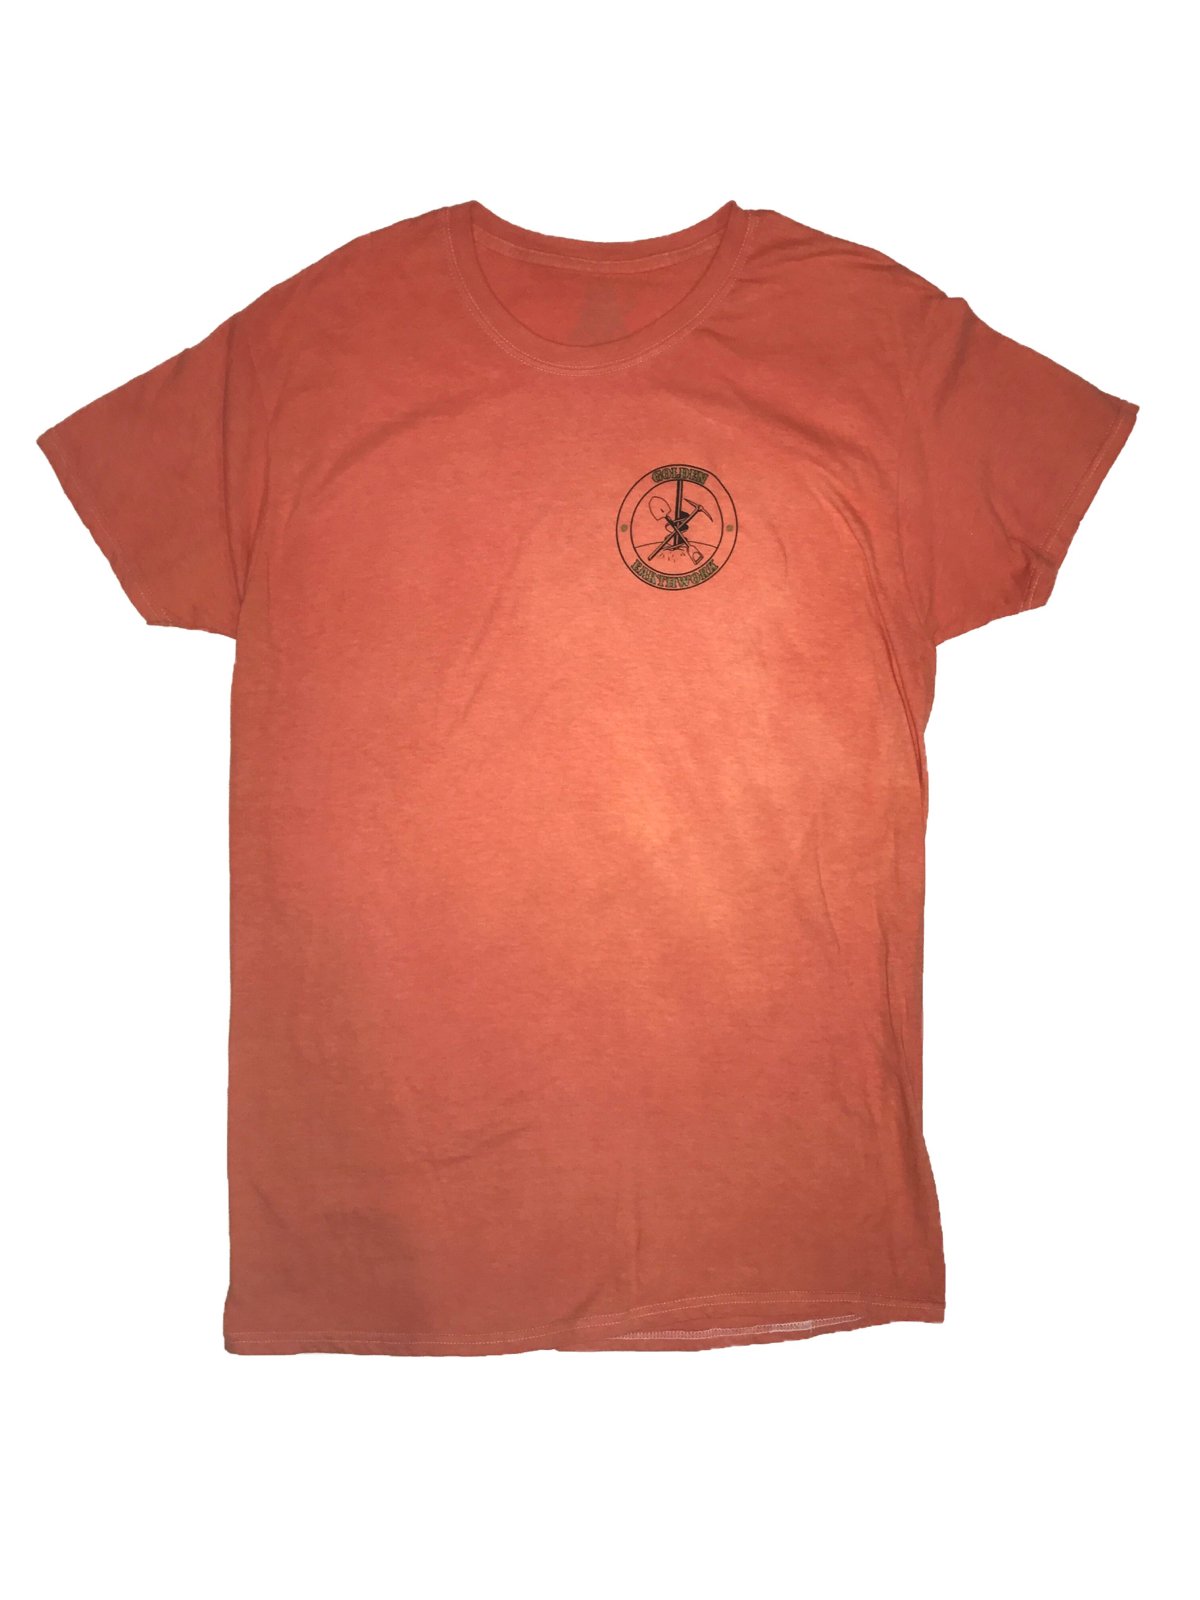 Image of Daily worker tee